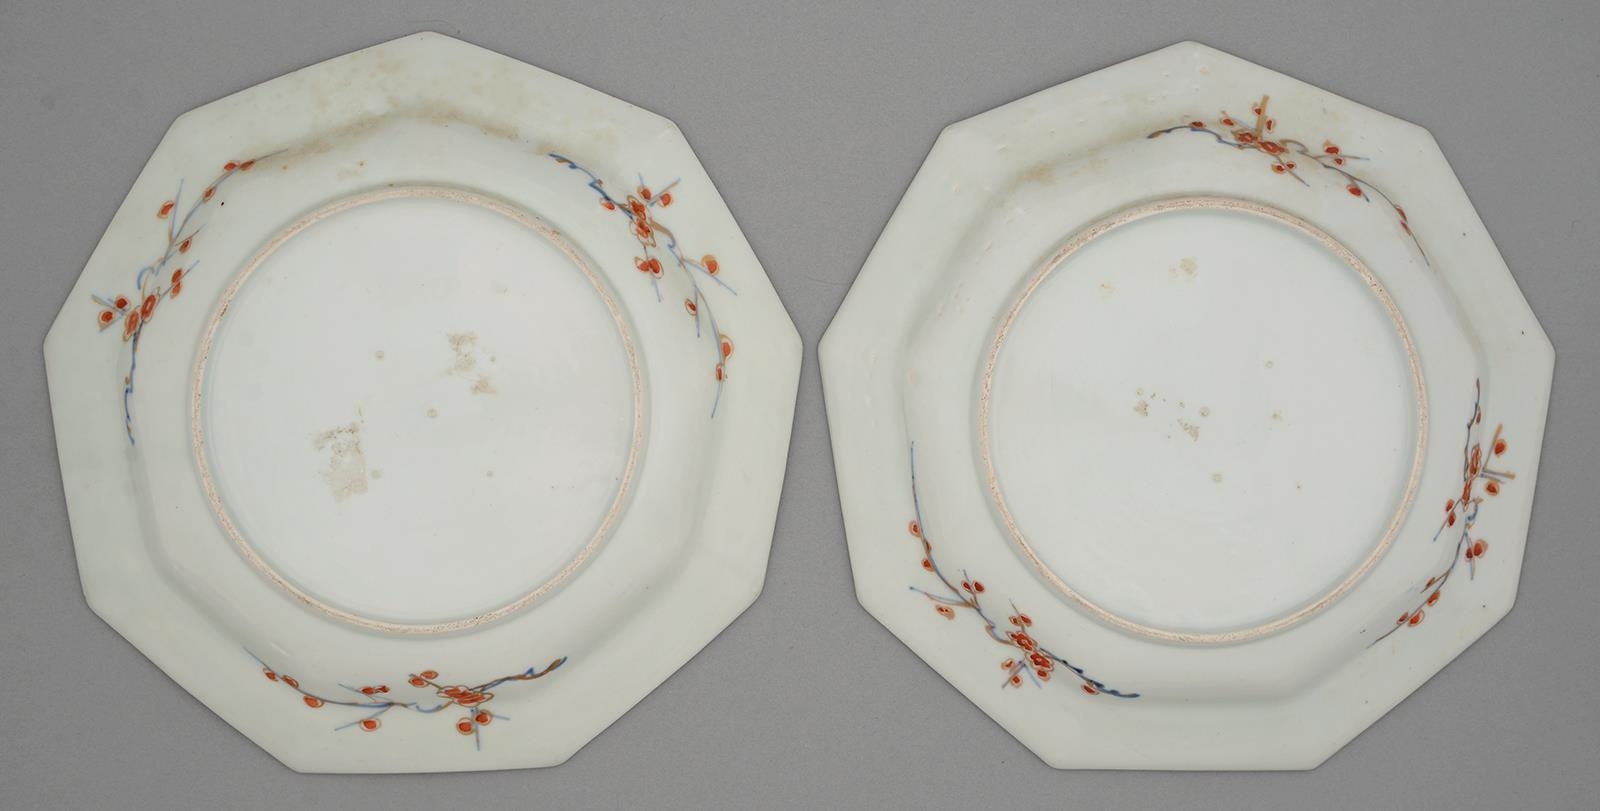 A pair of Imari nonagonal dishes, Edo period, 18th c, painted in underglaze blue and enamelled in - Image 2 of 2